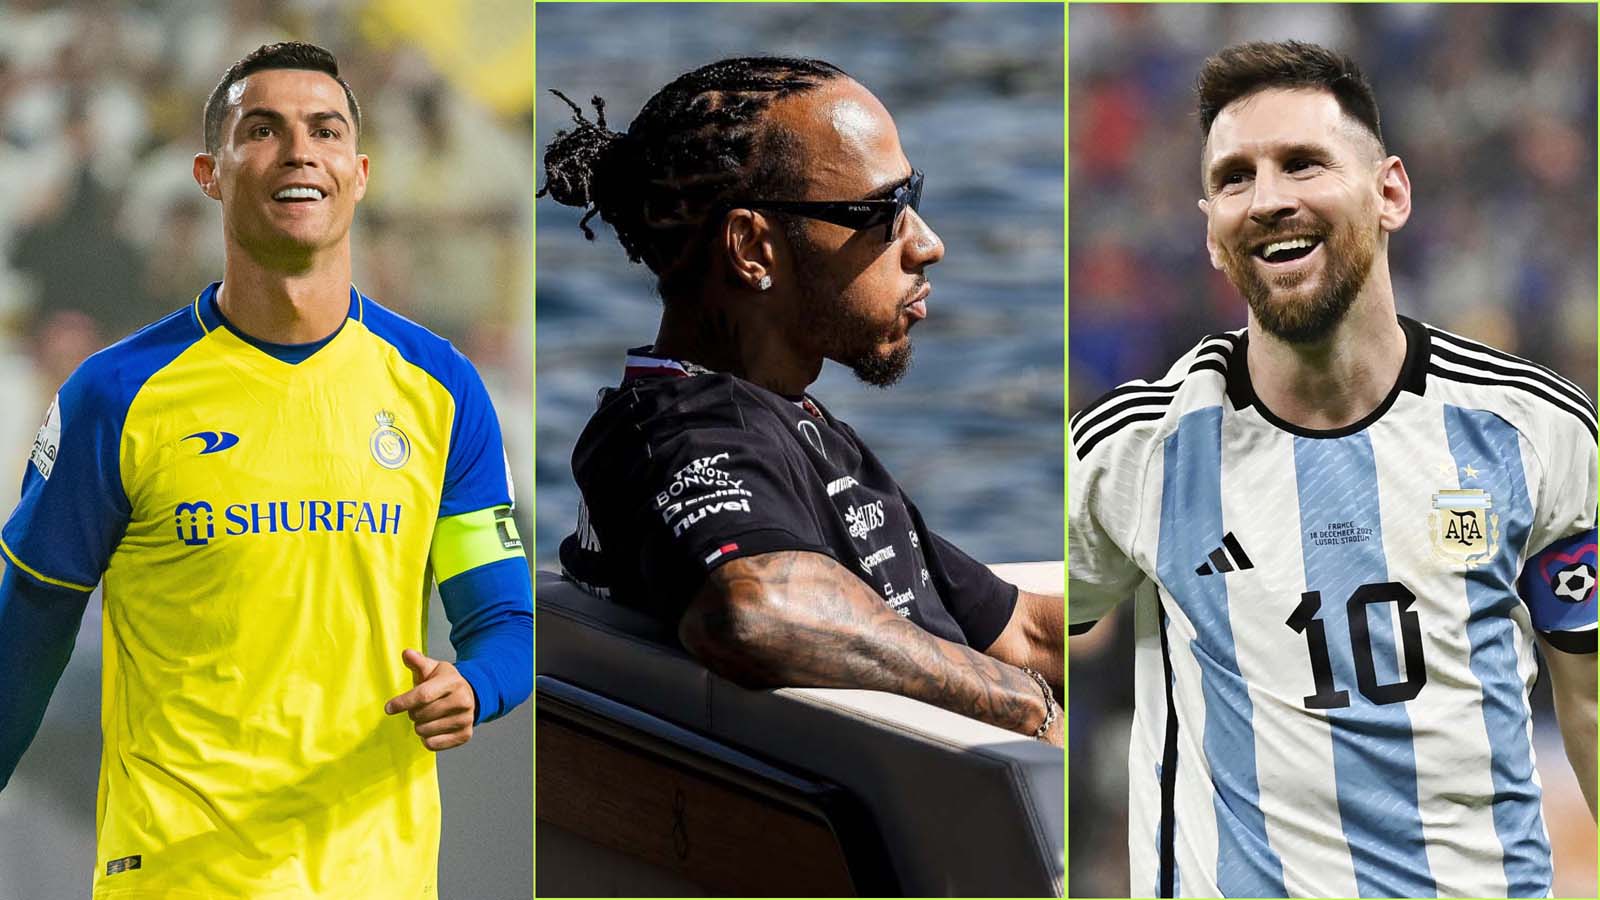 Highest-paid soccer stars 2021: How much do Cristiano Ronaldo, Lionel Messi  make?